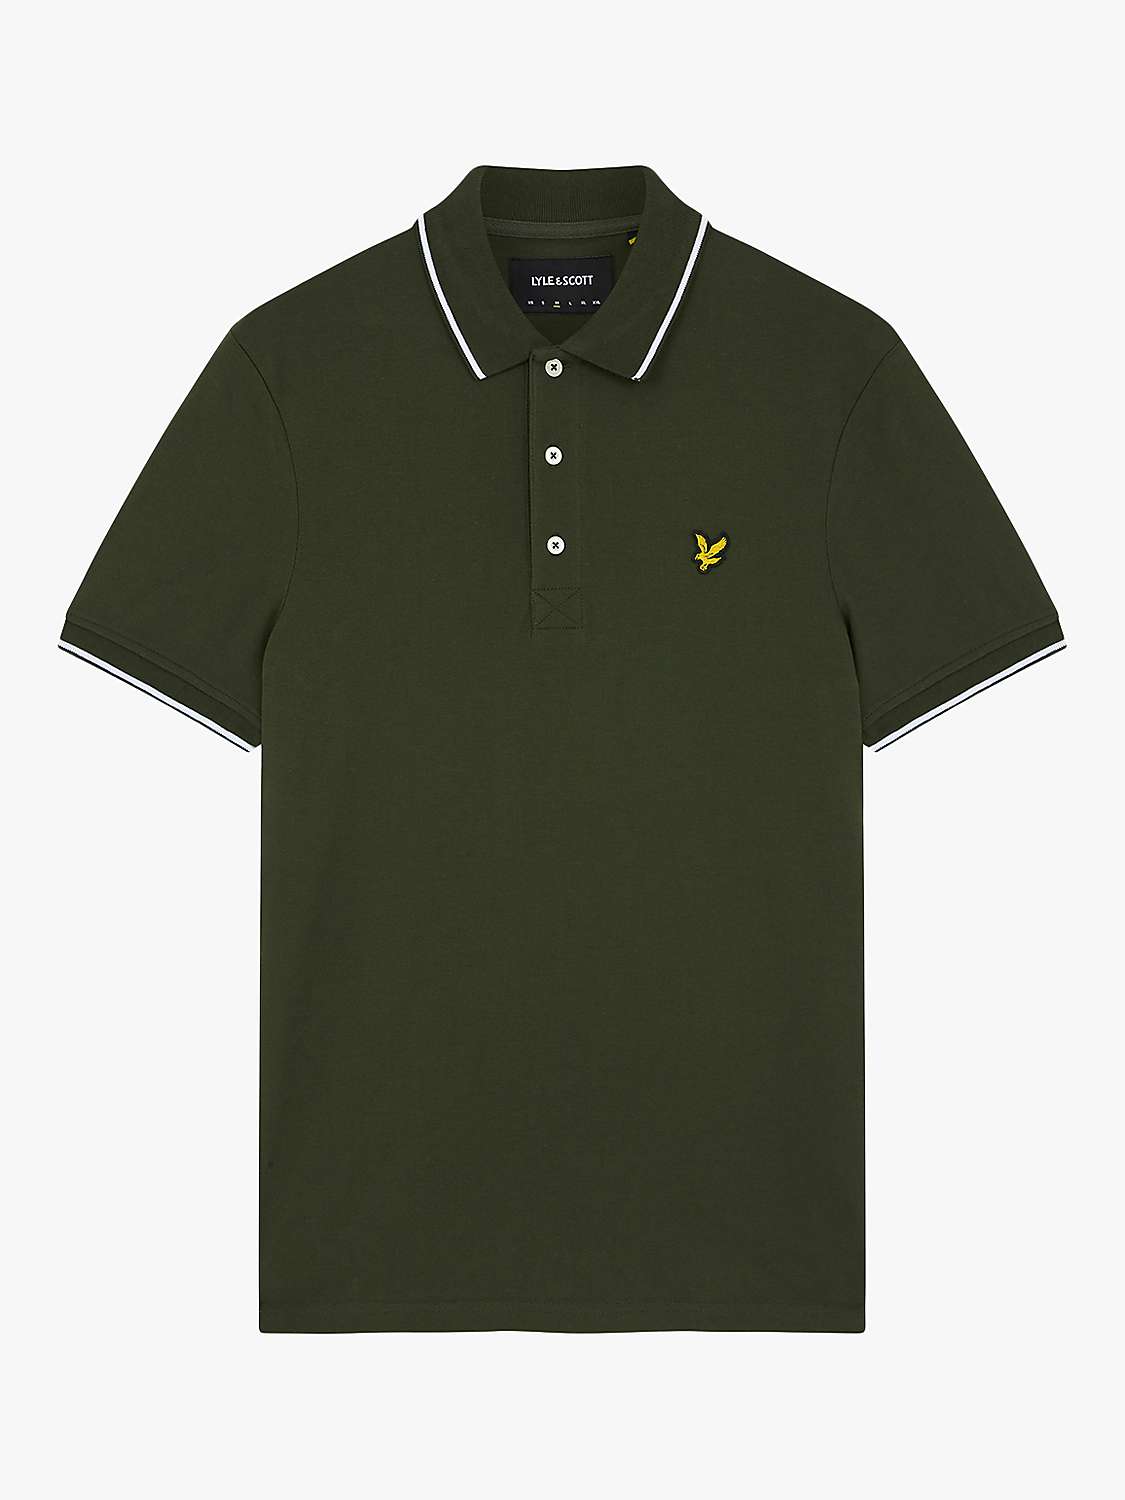 Buy Lyle & Scott Short Sleeve Tipped Polo Shirt Online at johnlewis.com